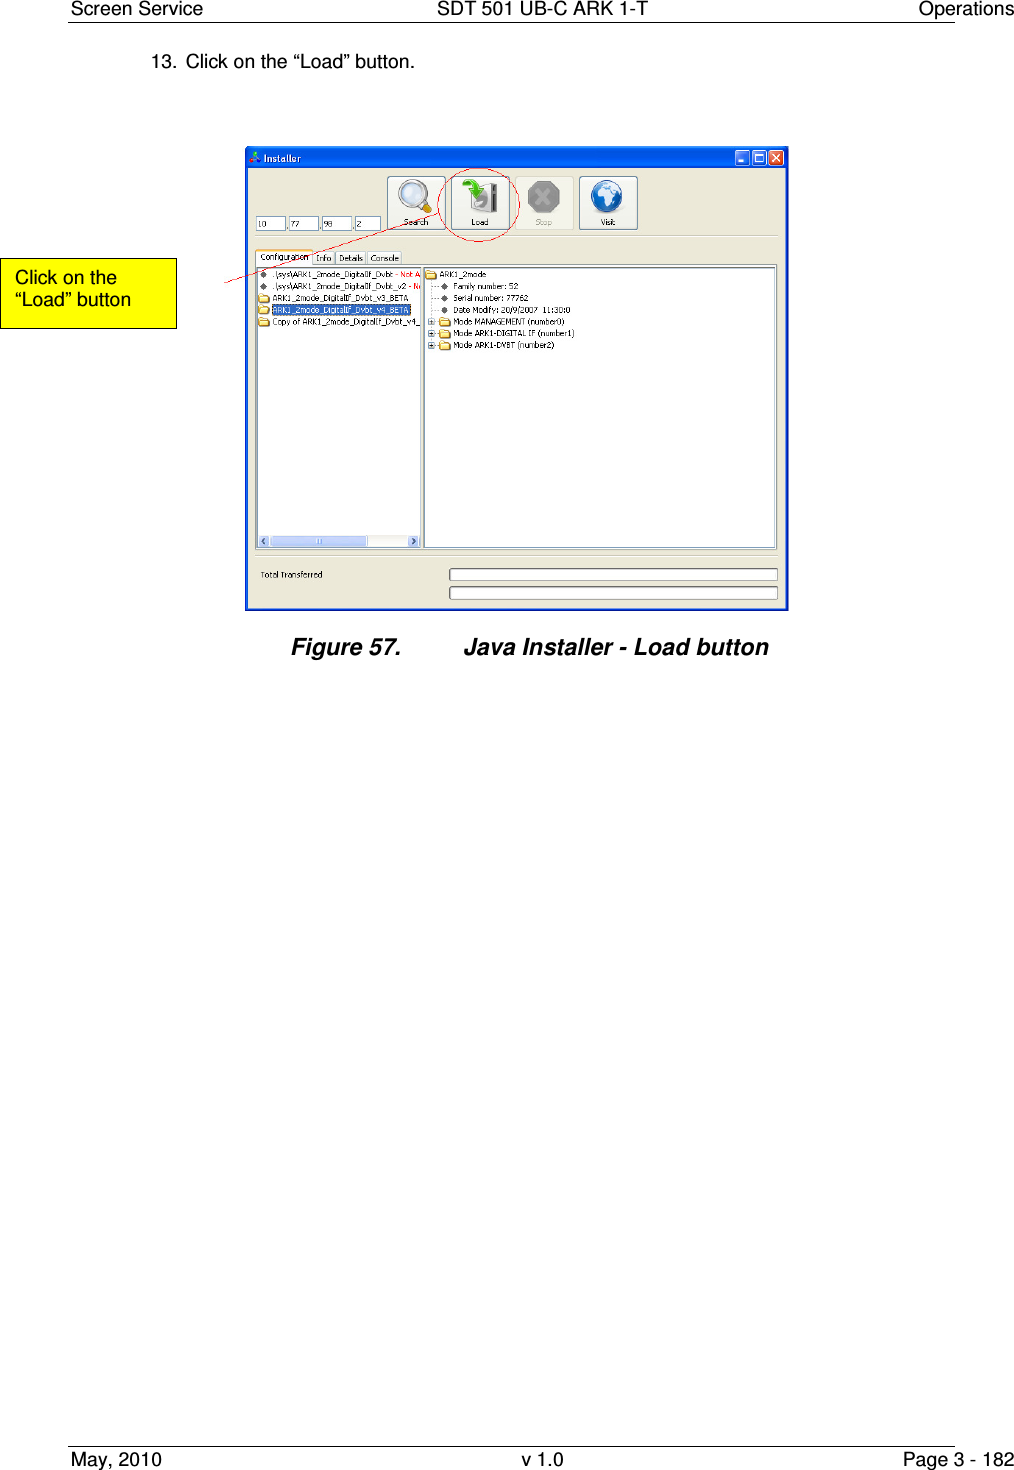 Screen Service  SDT 501 UB-C ARK 1-T  Operations May, 2010  v 1.0  Page 3 - 182 13.  Click on the “Load” button. Figure 57.  Java Installer - Load button   Click on the “Load” button  